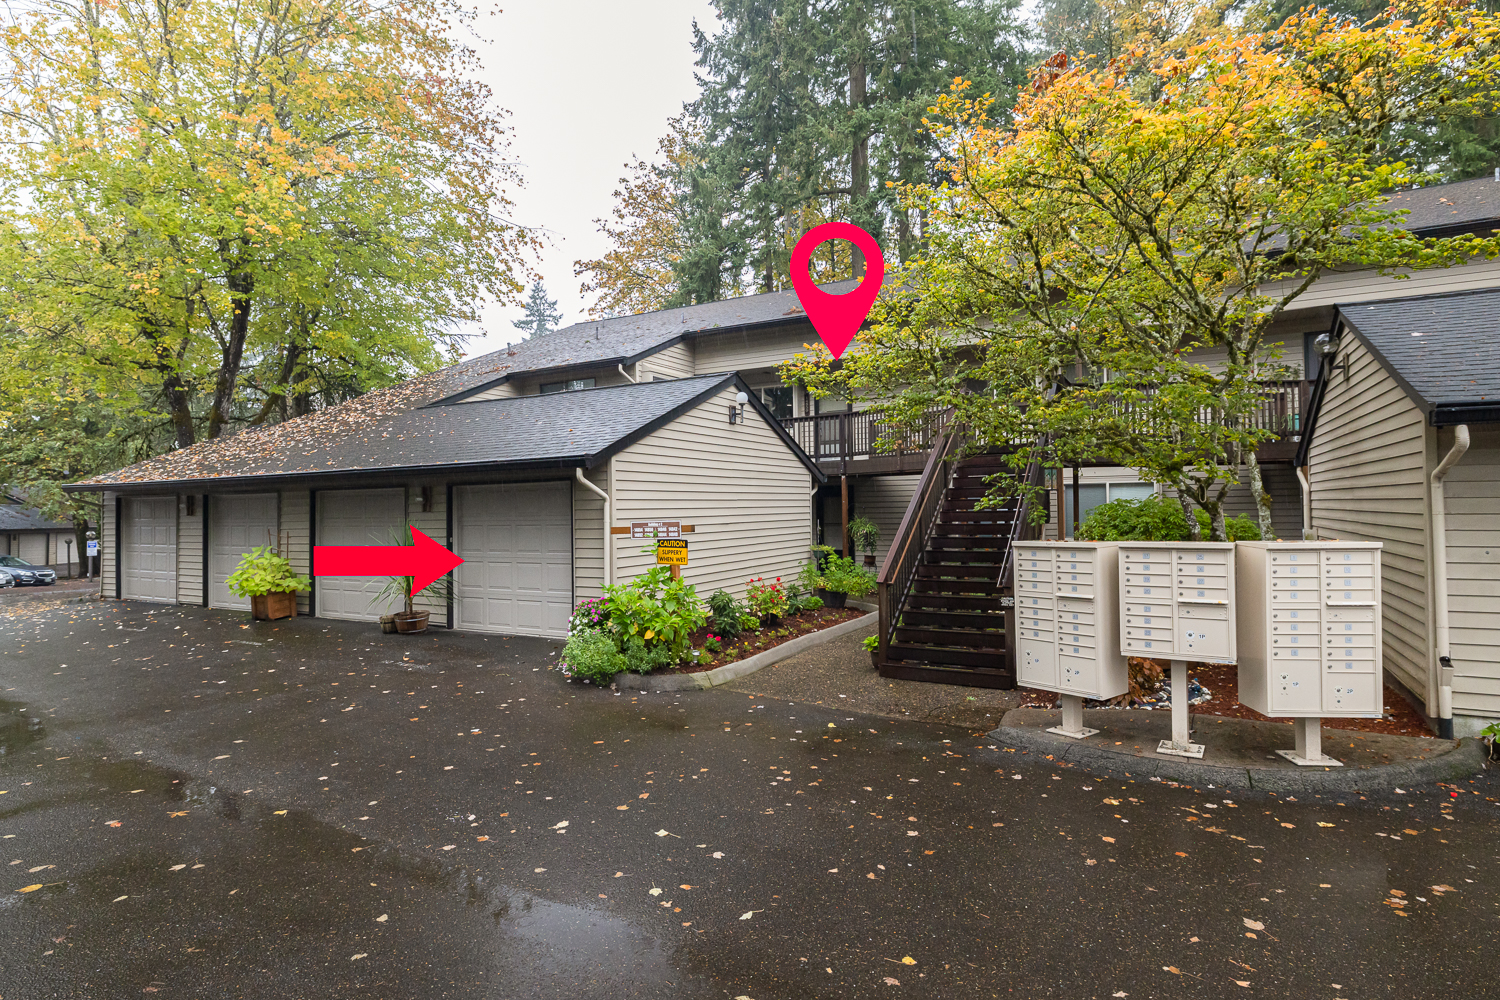 Now Available! 14850 SW 109th Ave., Tigard 97224 Range pricing: $240k - $267k